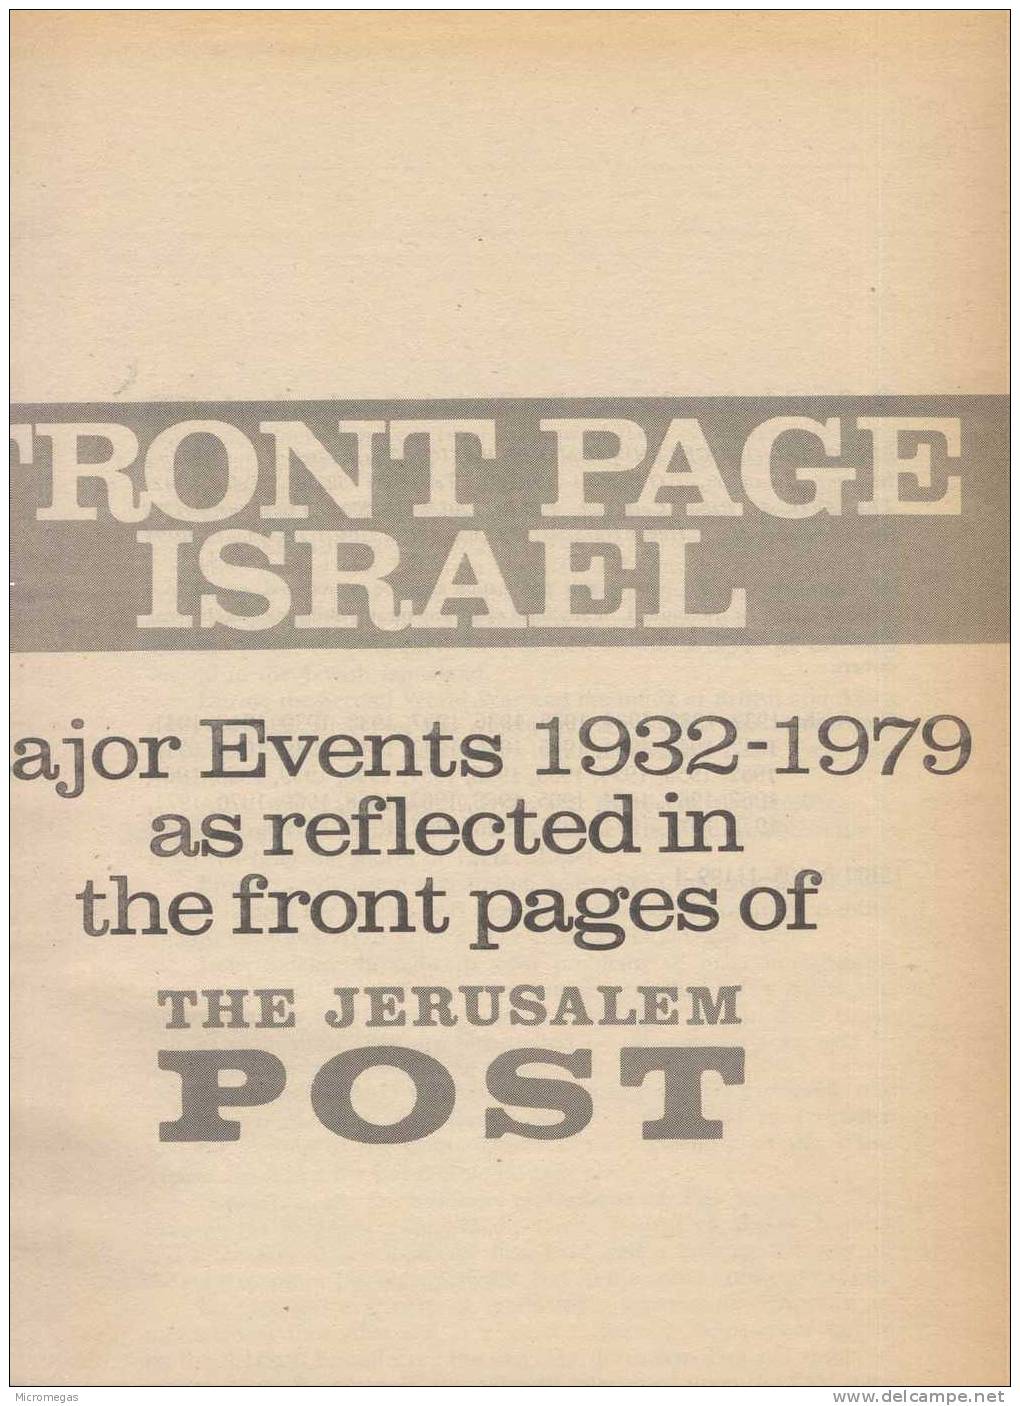 Front Page Israel - Major Events 1932-1979 As Reflected In The Front Pages Of The Jerusalem Post - Middle East